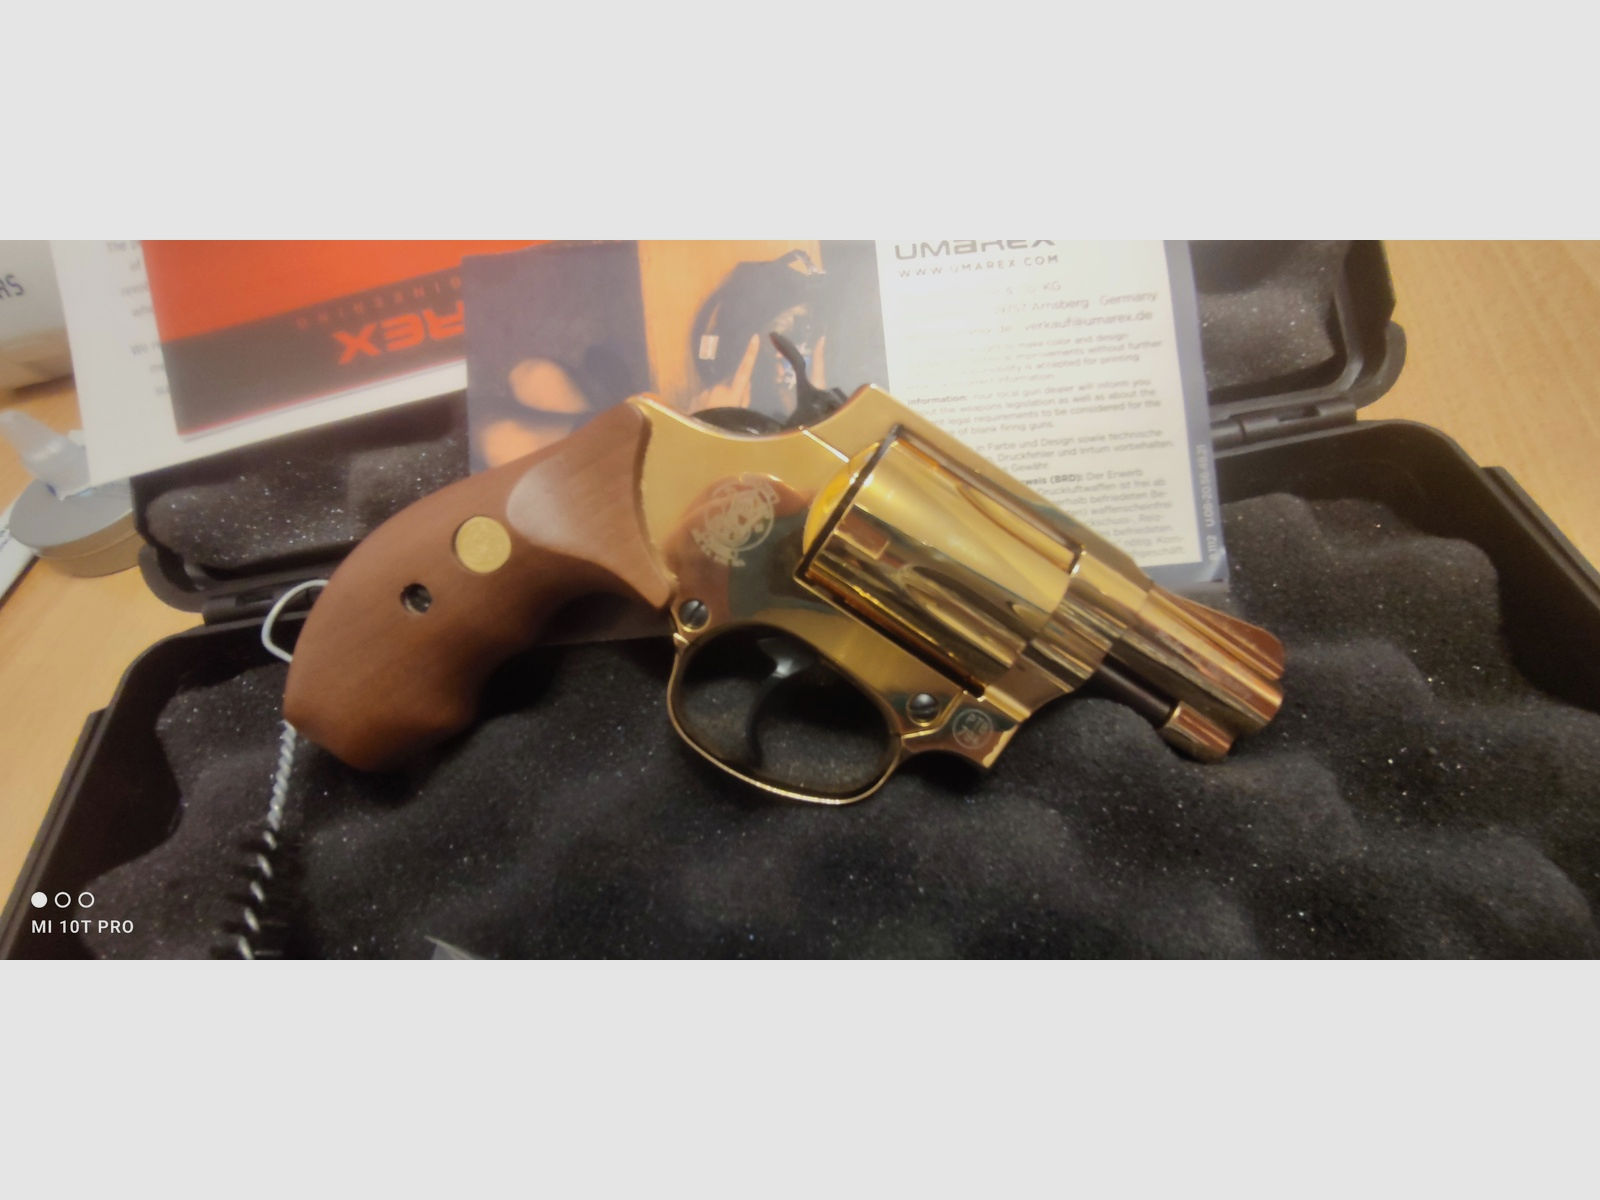 Smith Wesson chiefs special gold R.K. 9 mm